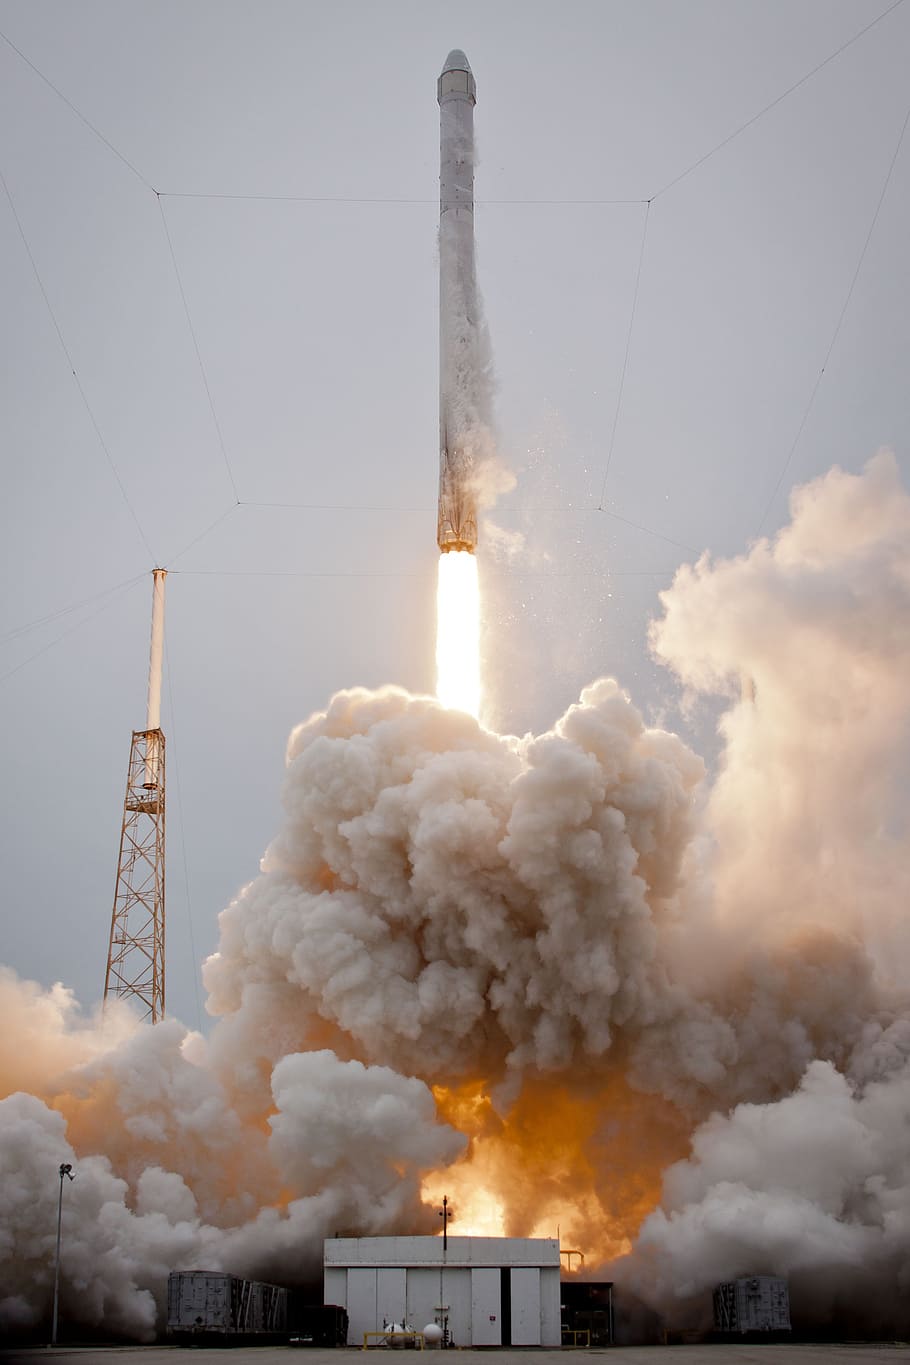 rocket launch during daytime, spacex, lift-off, flames, propulsion